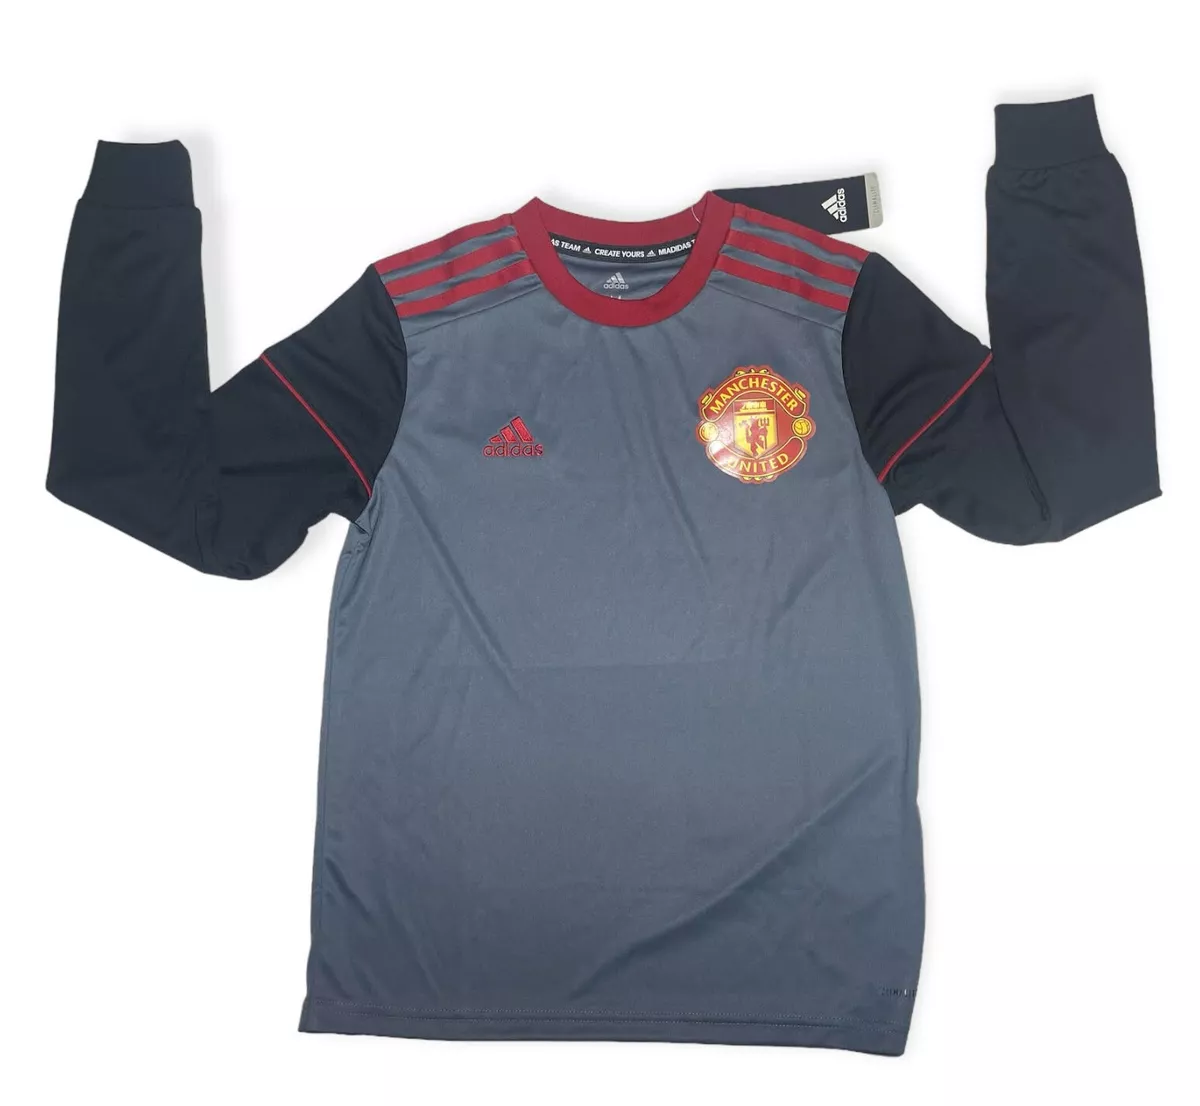 manchester united soccer jersey